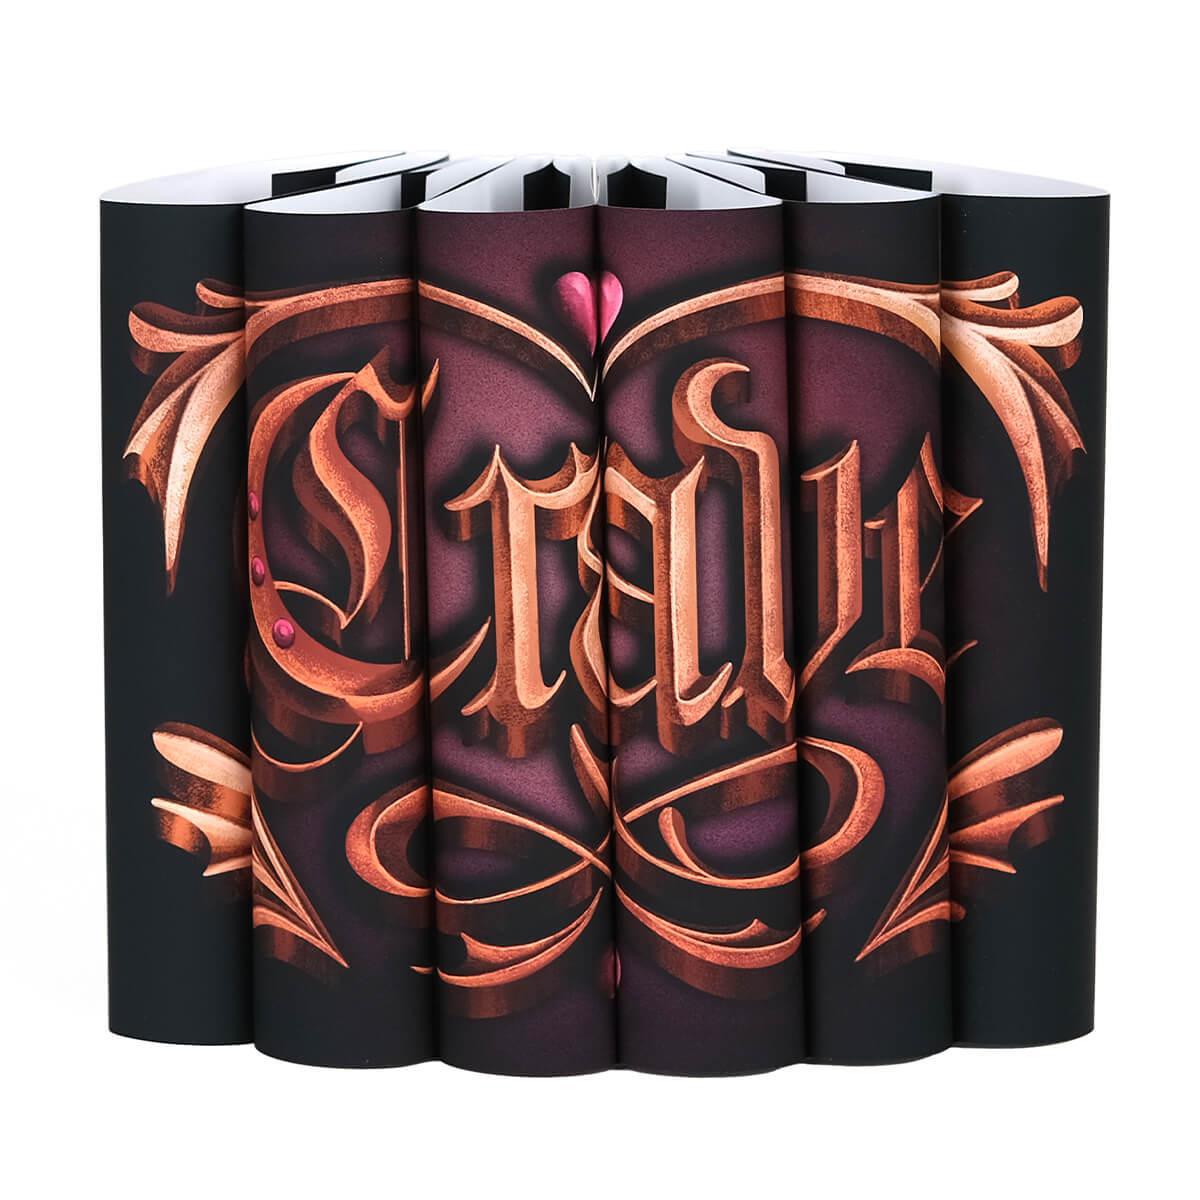 Dust Jackets only bronze ornamental gothic illustration of the word "Crave". Illustration set against a pink to black gradients surrounded by embossed style ornaments and a pink heart centered across the spines.